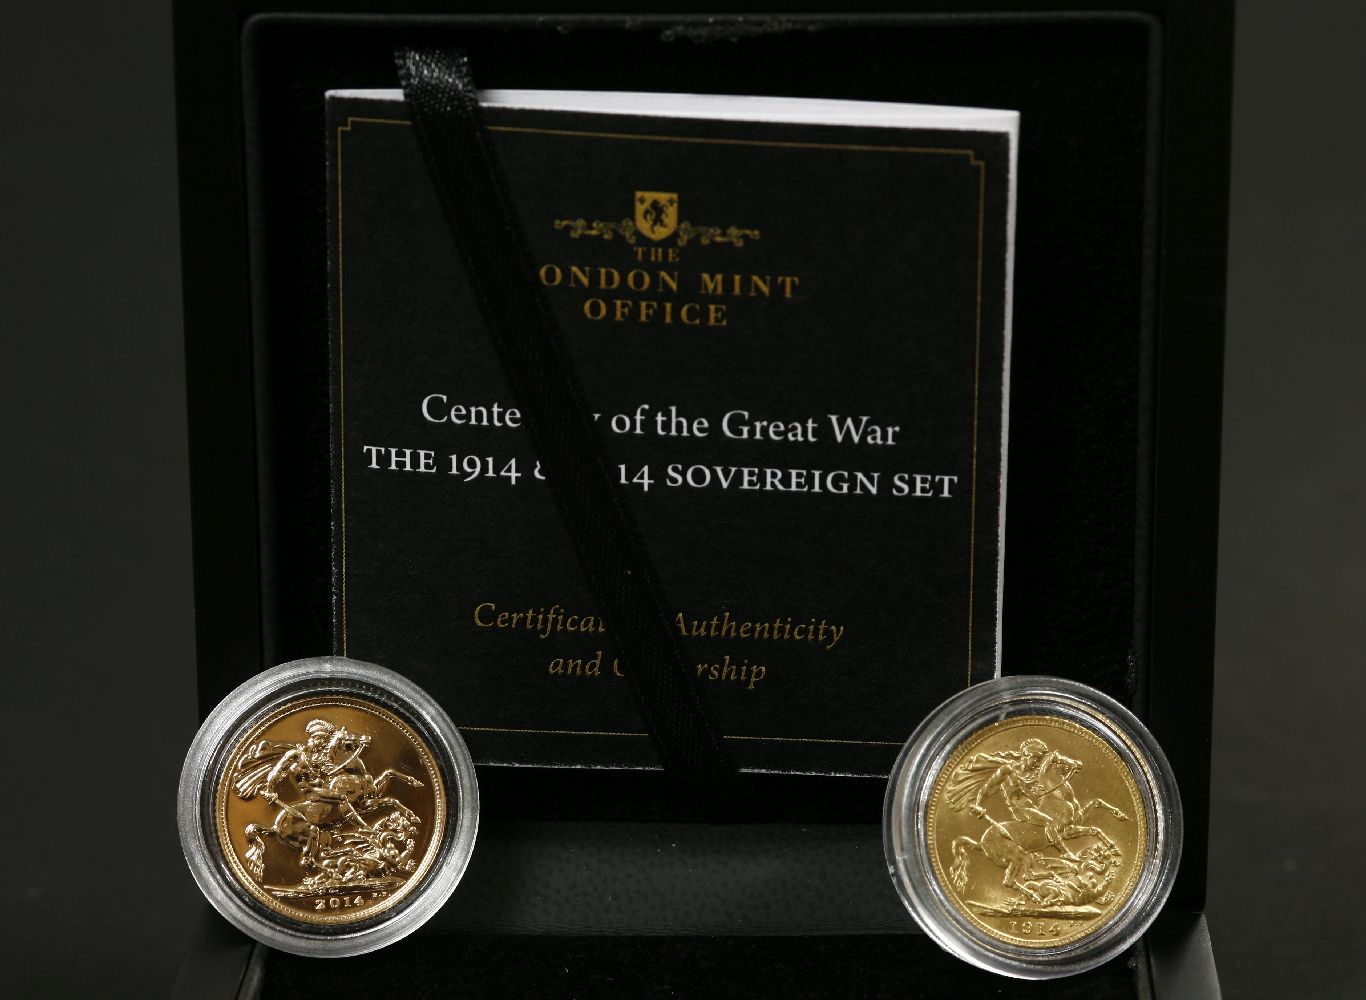 Great Britain, Centenary of the Great War, Sovereigns, 1914 and 2014, released by The London Mint - Image 2 of 2